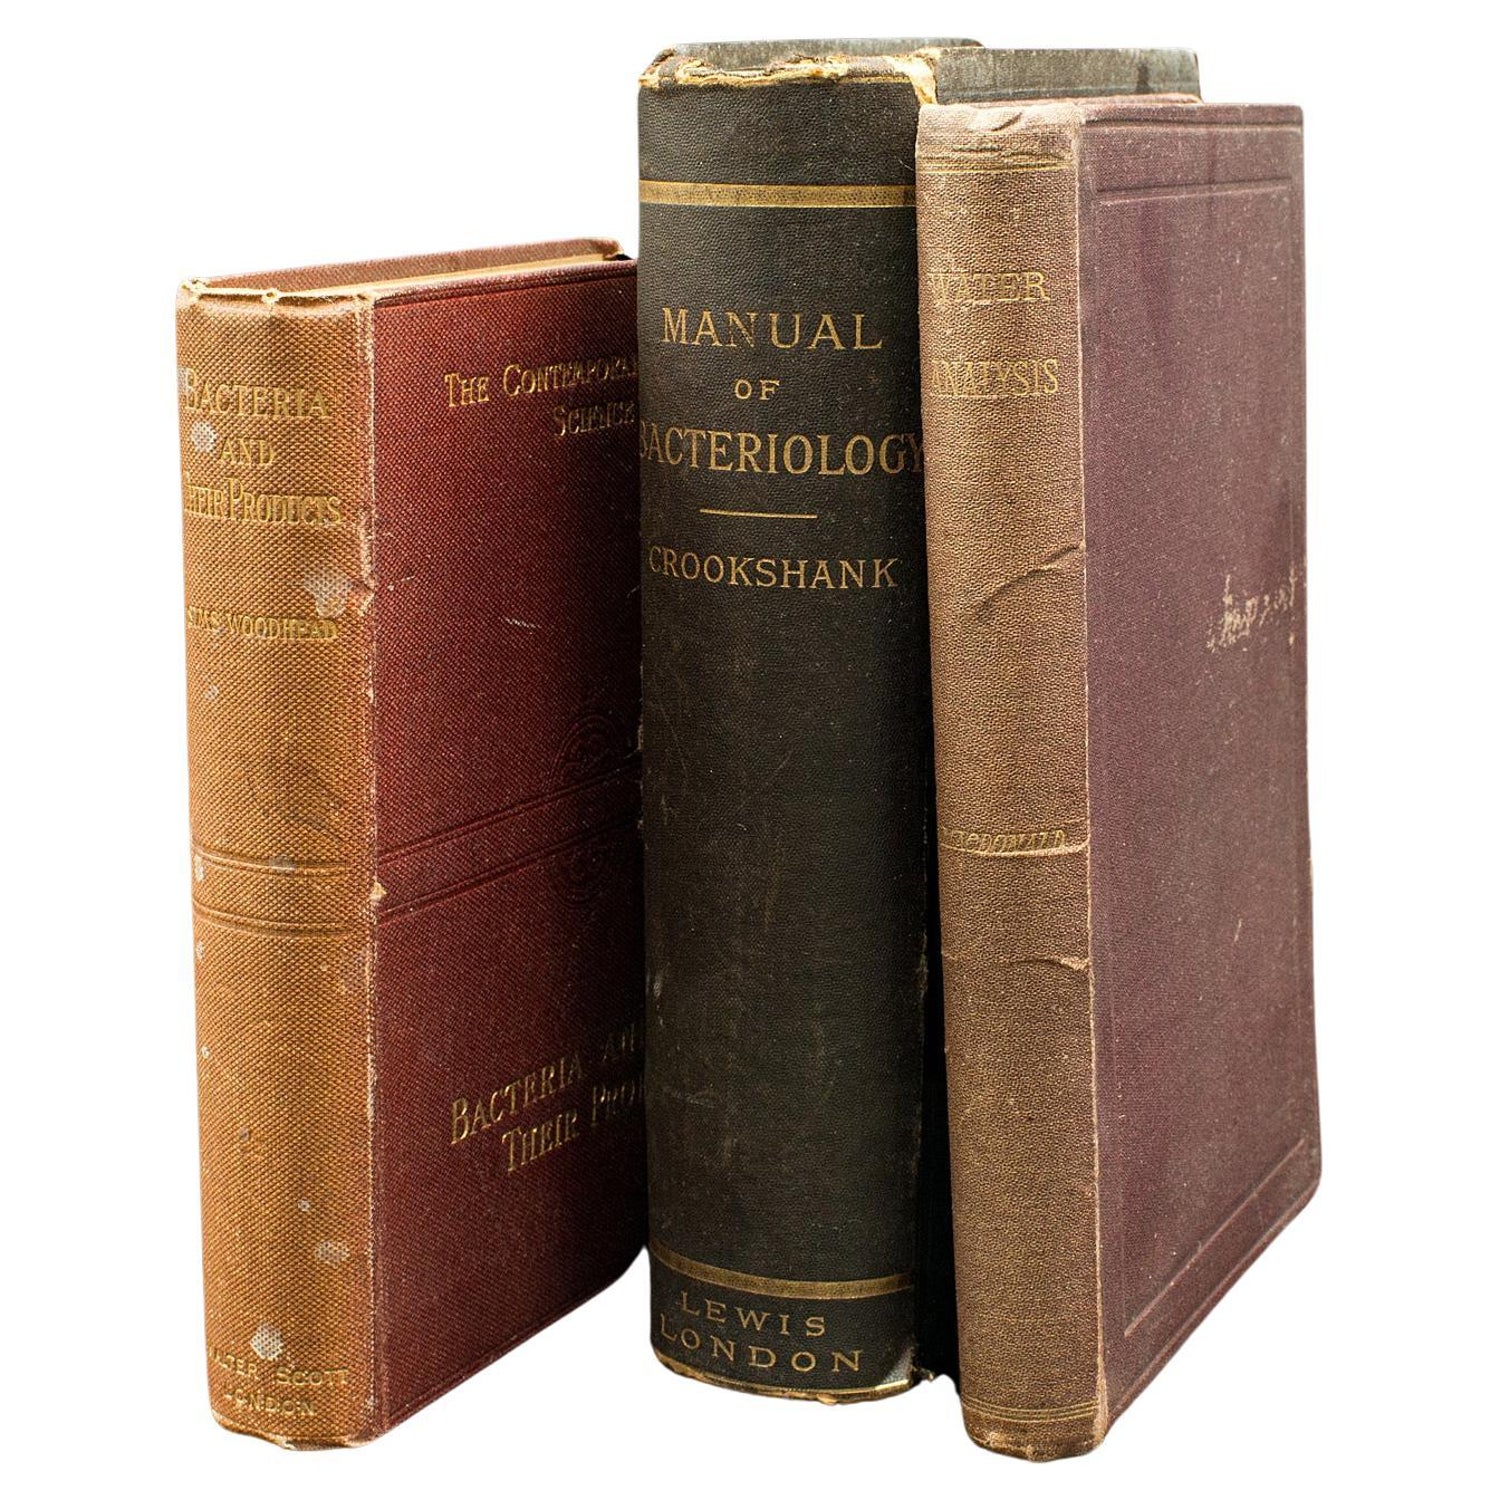 https://a.1stdibscdn.com/set-of-3-antique-biology-interest-books-english-scientific-reference-victorian-for-sale/f_26453/f_375307321702401007616/f_37530732_1702401008174_bg_processed.jpg?width=1500